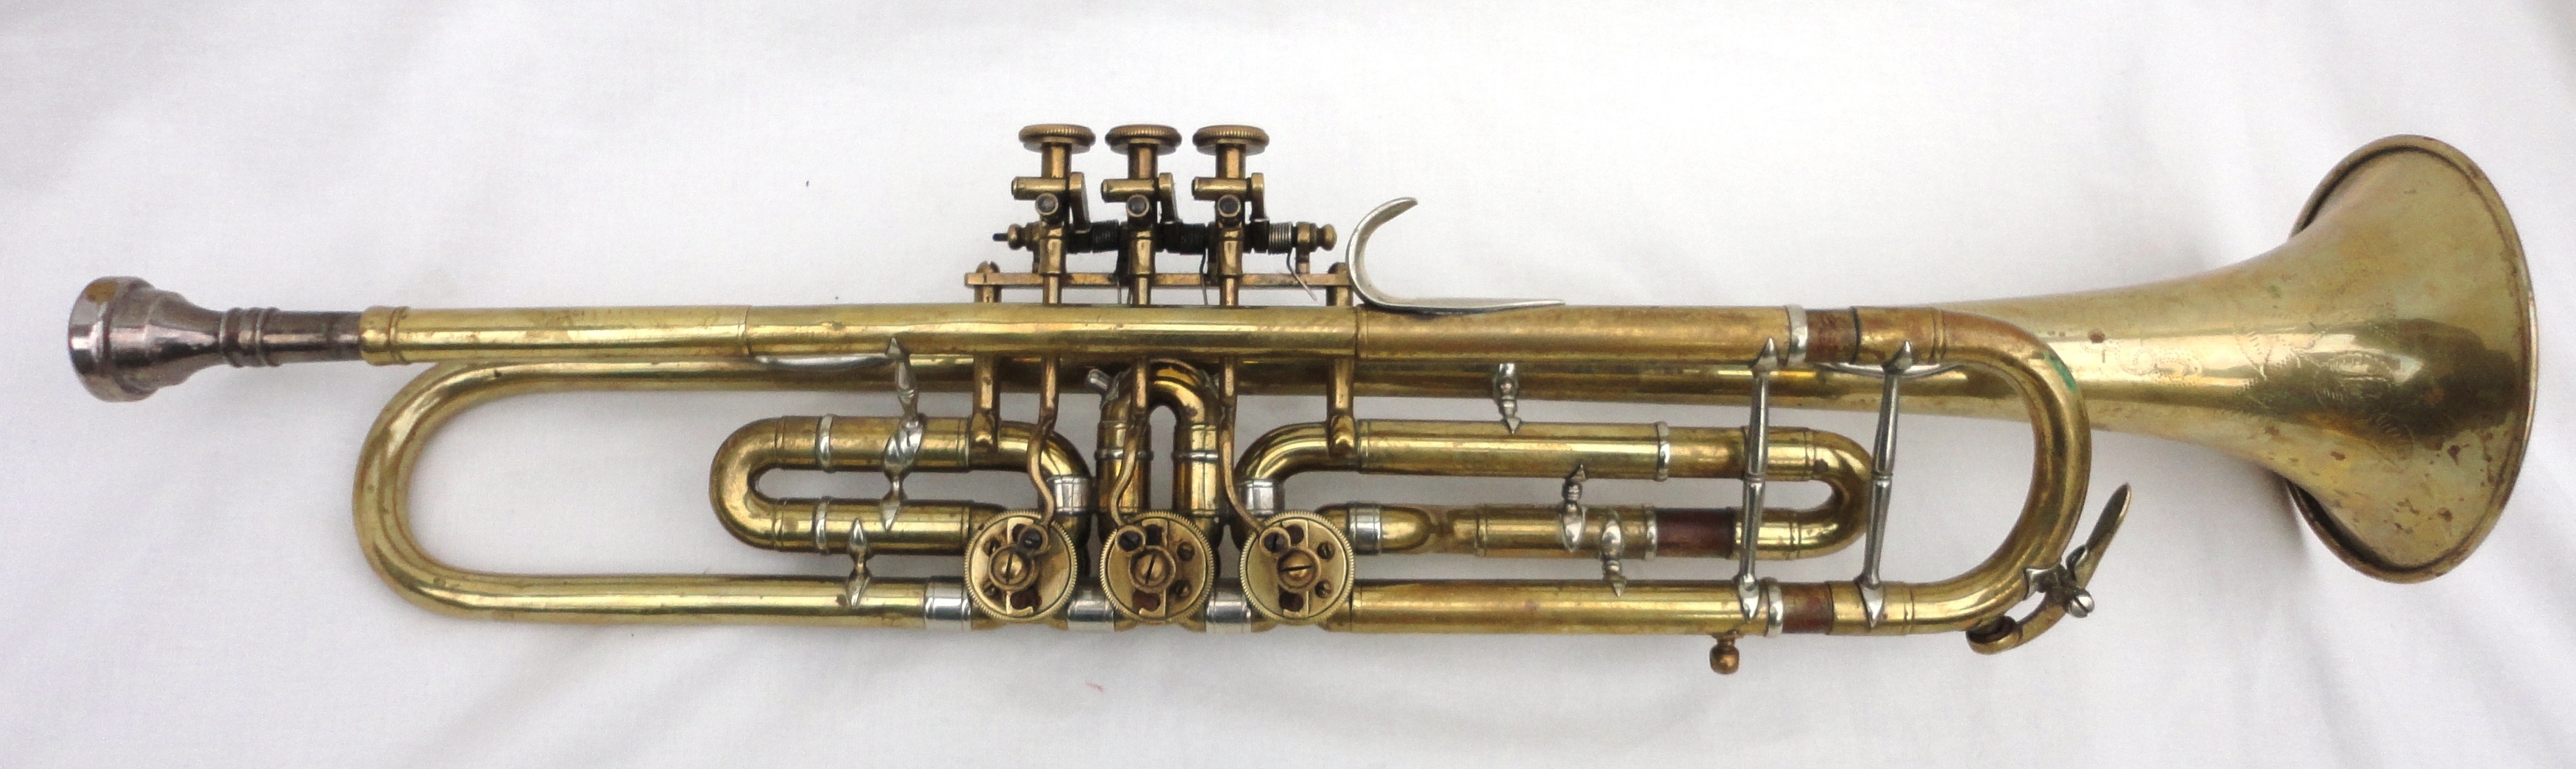 anonymous top action rotary valve trumpet, coll. Gerard Westerhof